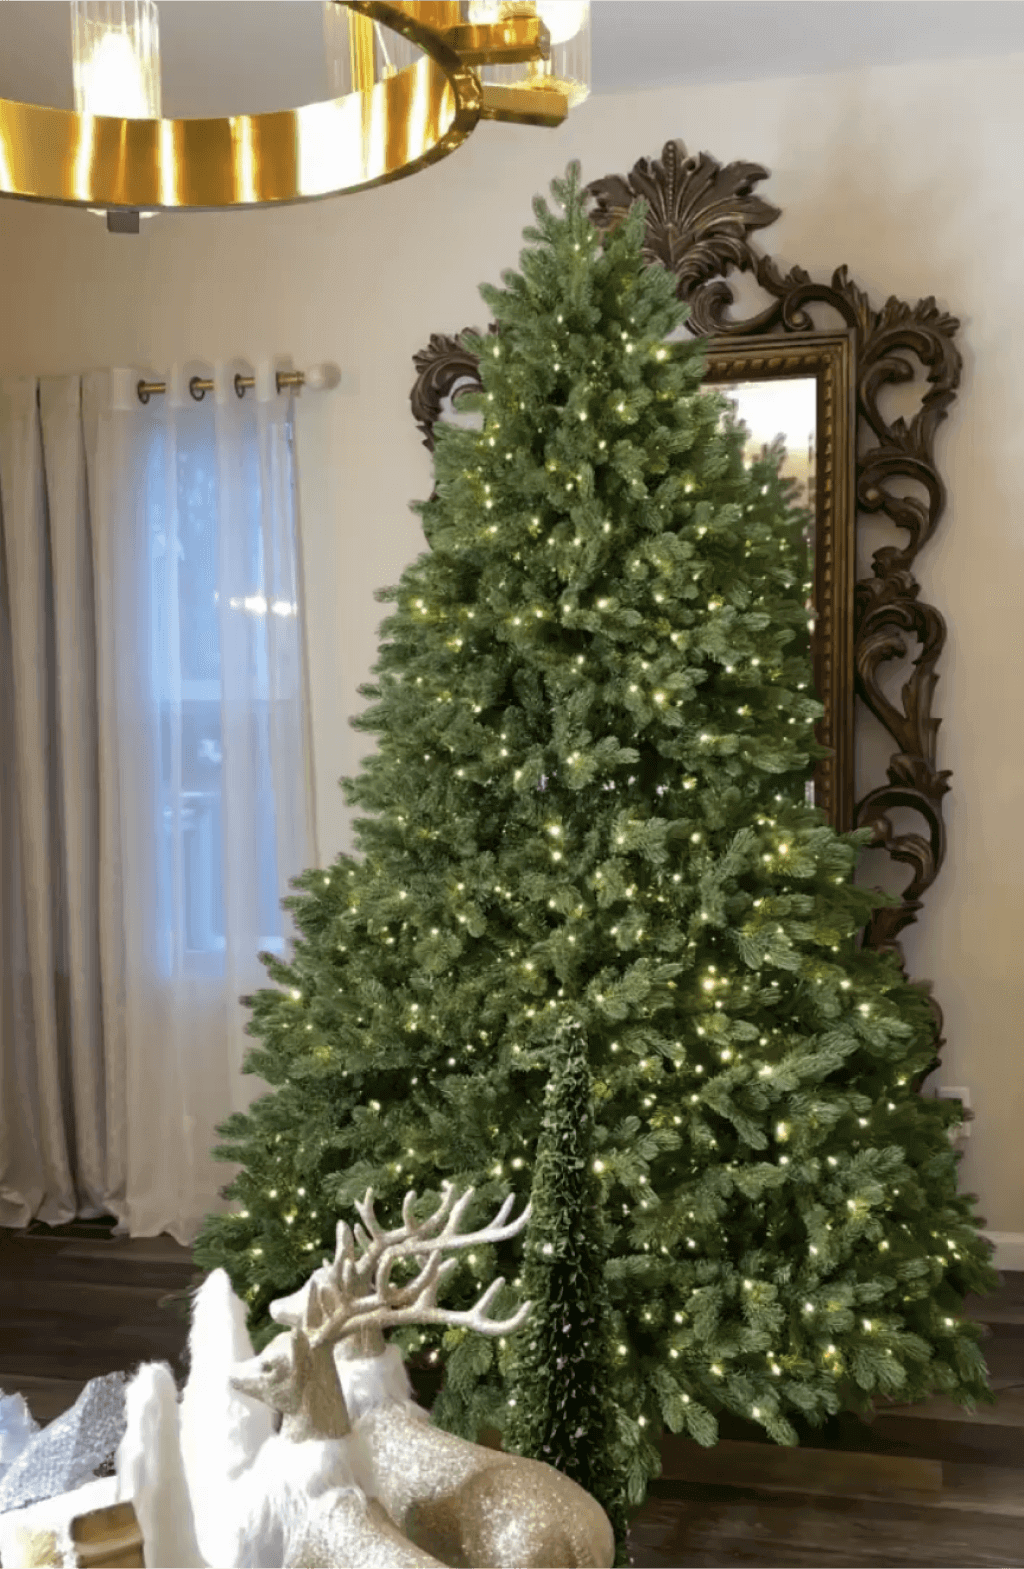 King of Christmas 9' Cypress Spruce Artificial Christmas Tree Unlit